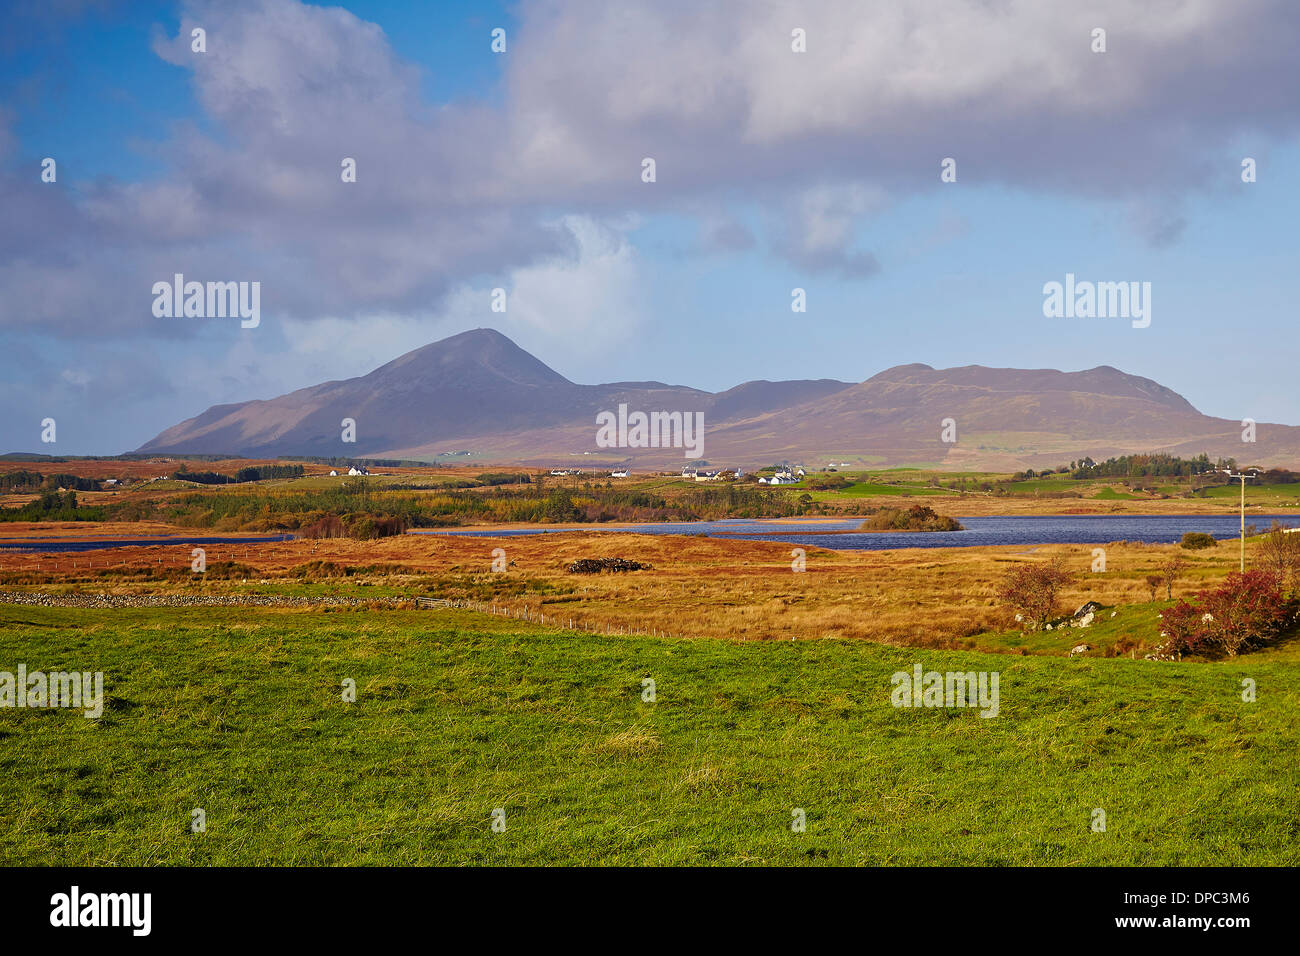 Co.Mayo landscape shows Moher Lake with Croagh Patrick Mountain in background Stock Photo